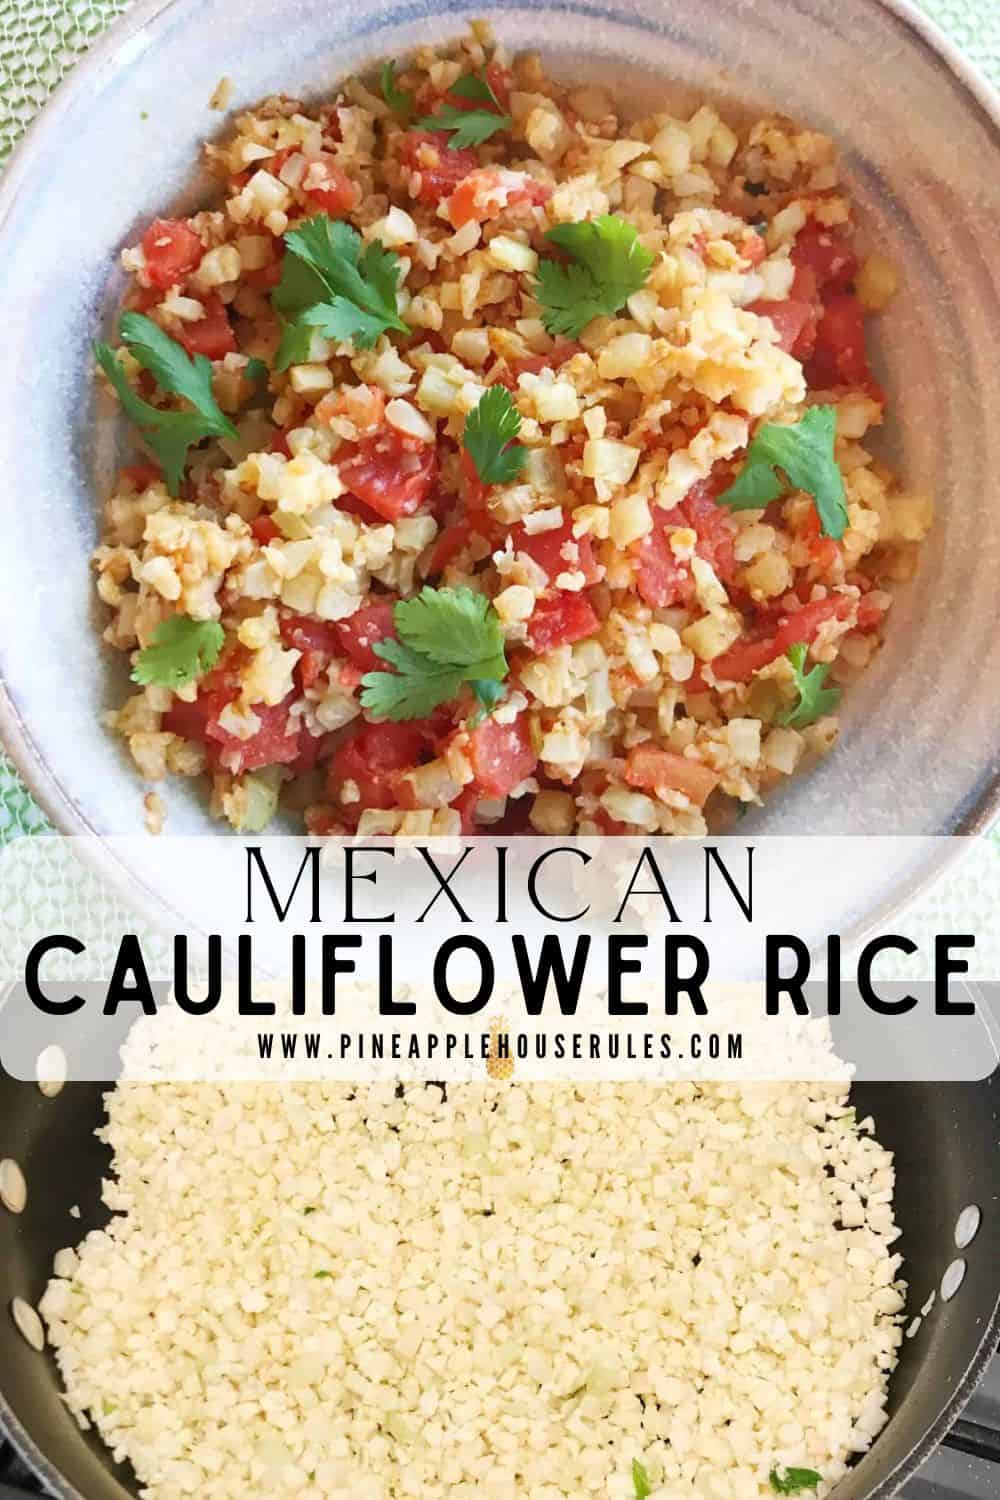 Mexican Cauliflower Rice is a wonderful low carb substitute for Mexican Rice. It's easy to make and tastes delicious! Mexican Cauliflower Rice | Riced Cauliflower | Riced Cauliflower Recipes | Mexican Rice | Low Carb Recipes | Low Carb Recipes Easy | Low Carb Sides | Low Carb Side Dishes | Keto Friendly Sides | Keto Friendly Recipes | Keto Sides | Keto Side Dishes | Keto Sides Easy | Riced Cauliflower Recipes Easy